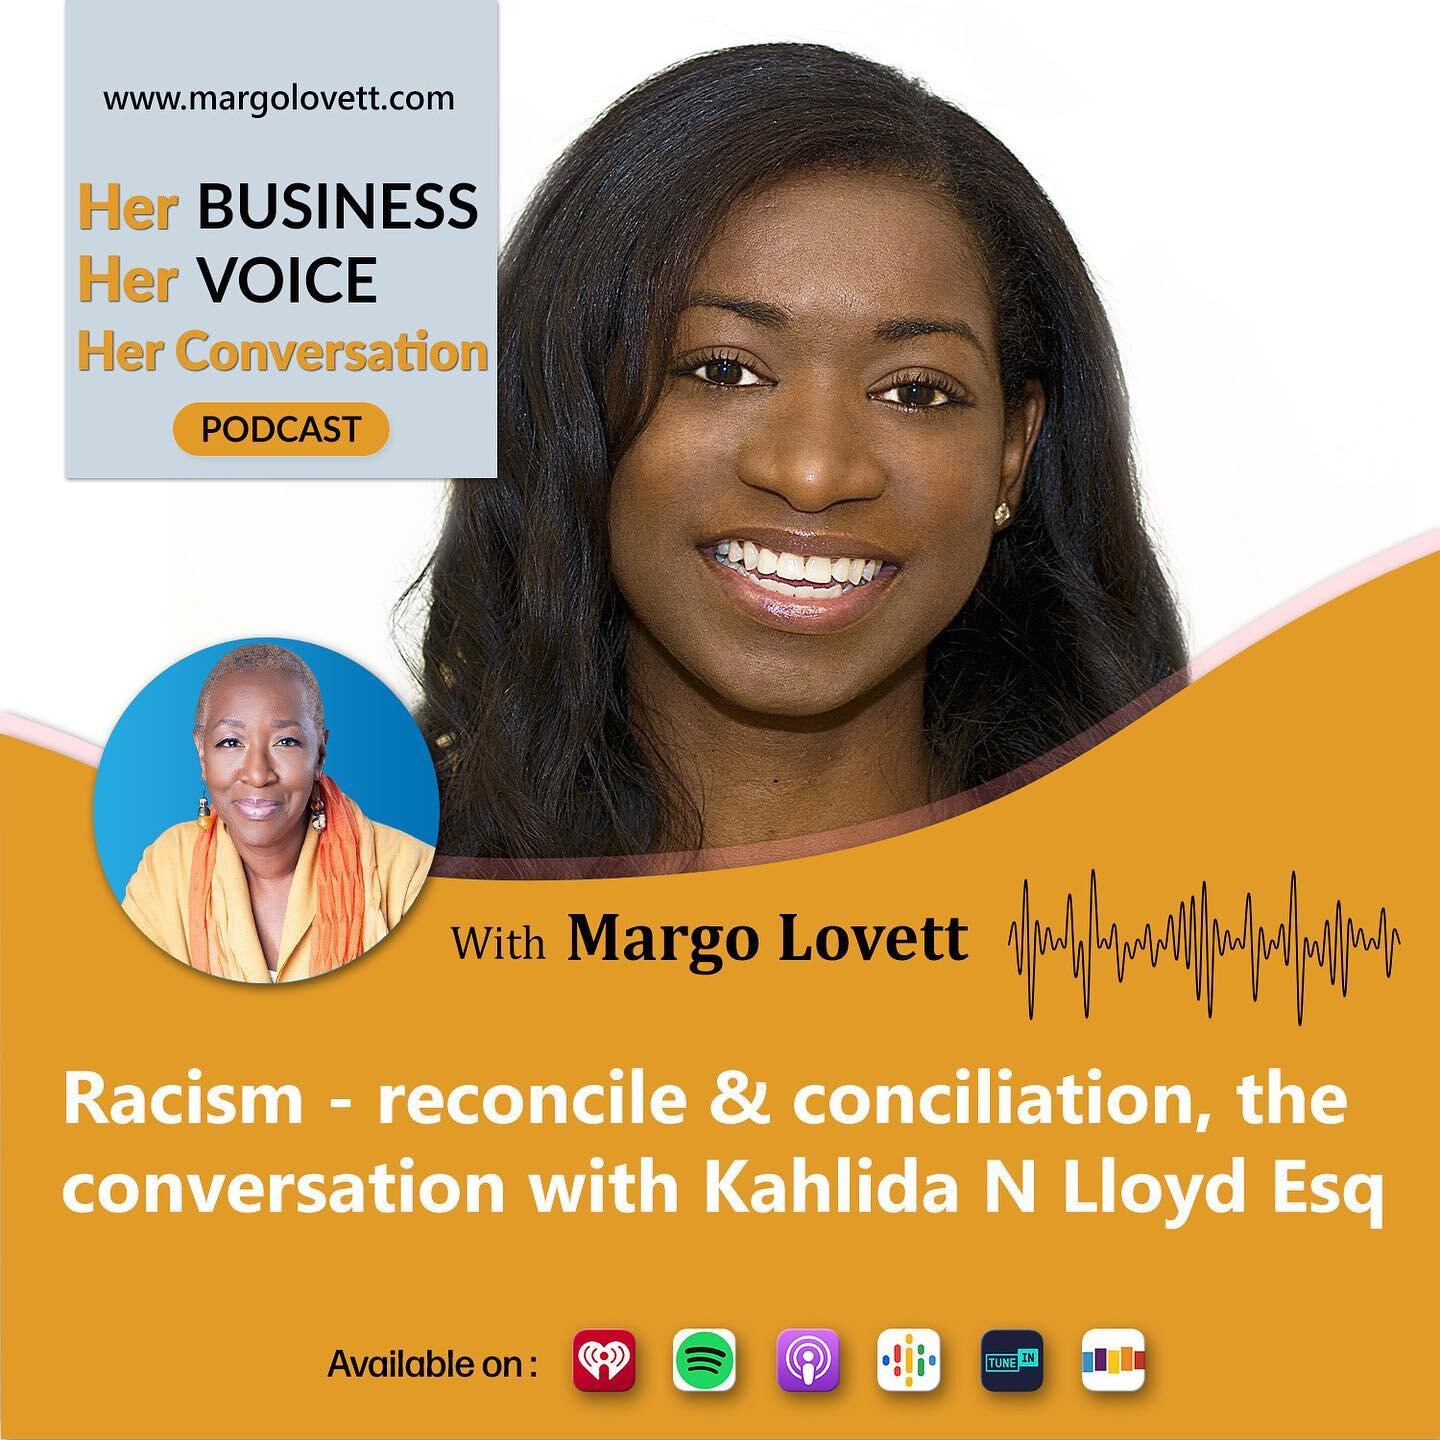 Thank you @margolovett70 for featuring me on Her Business, Her Voice, Her Business! Check out this podcast episode where I talk about reconciliation, conciliation, Mission Reconcile @iamareconciler and my racial healing &amp; equity consulting as a w